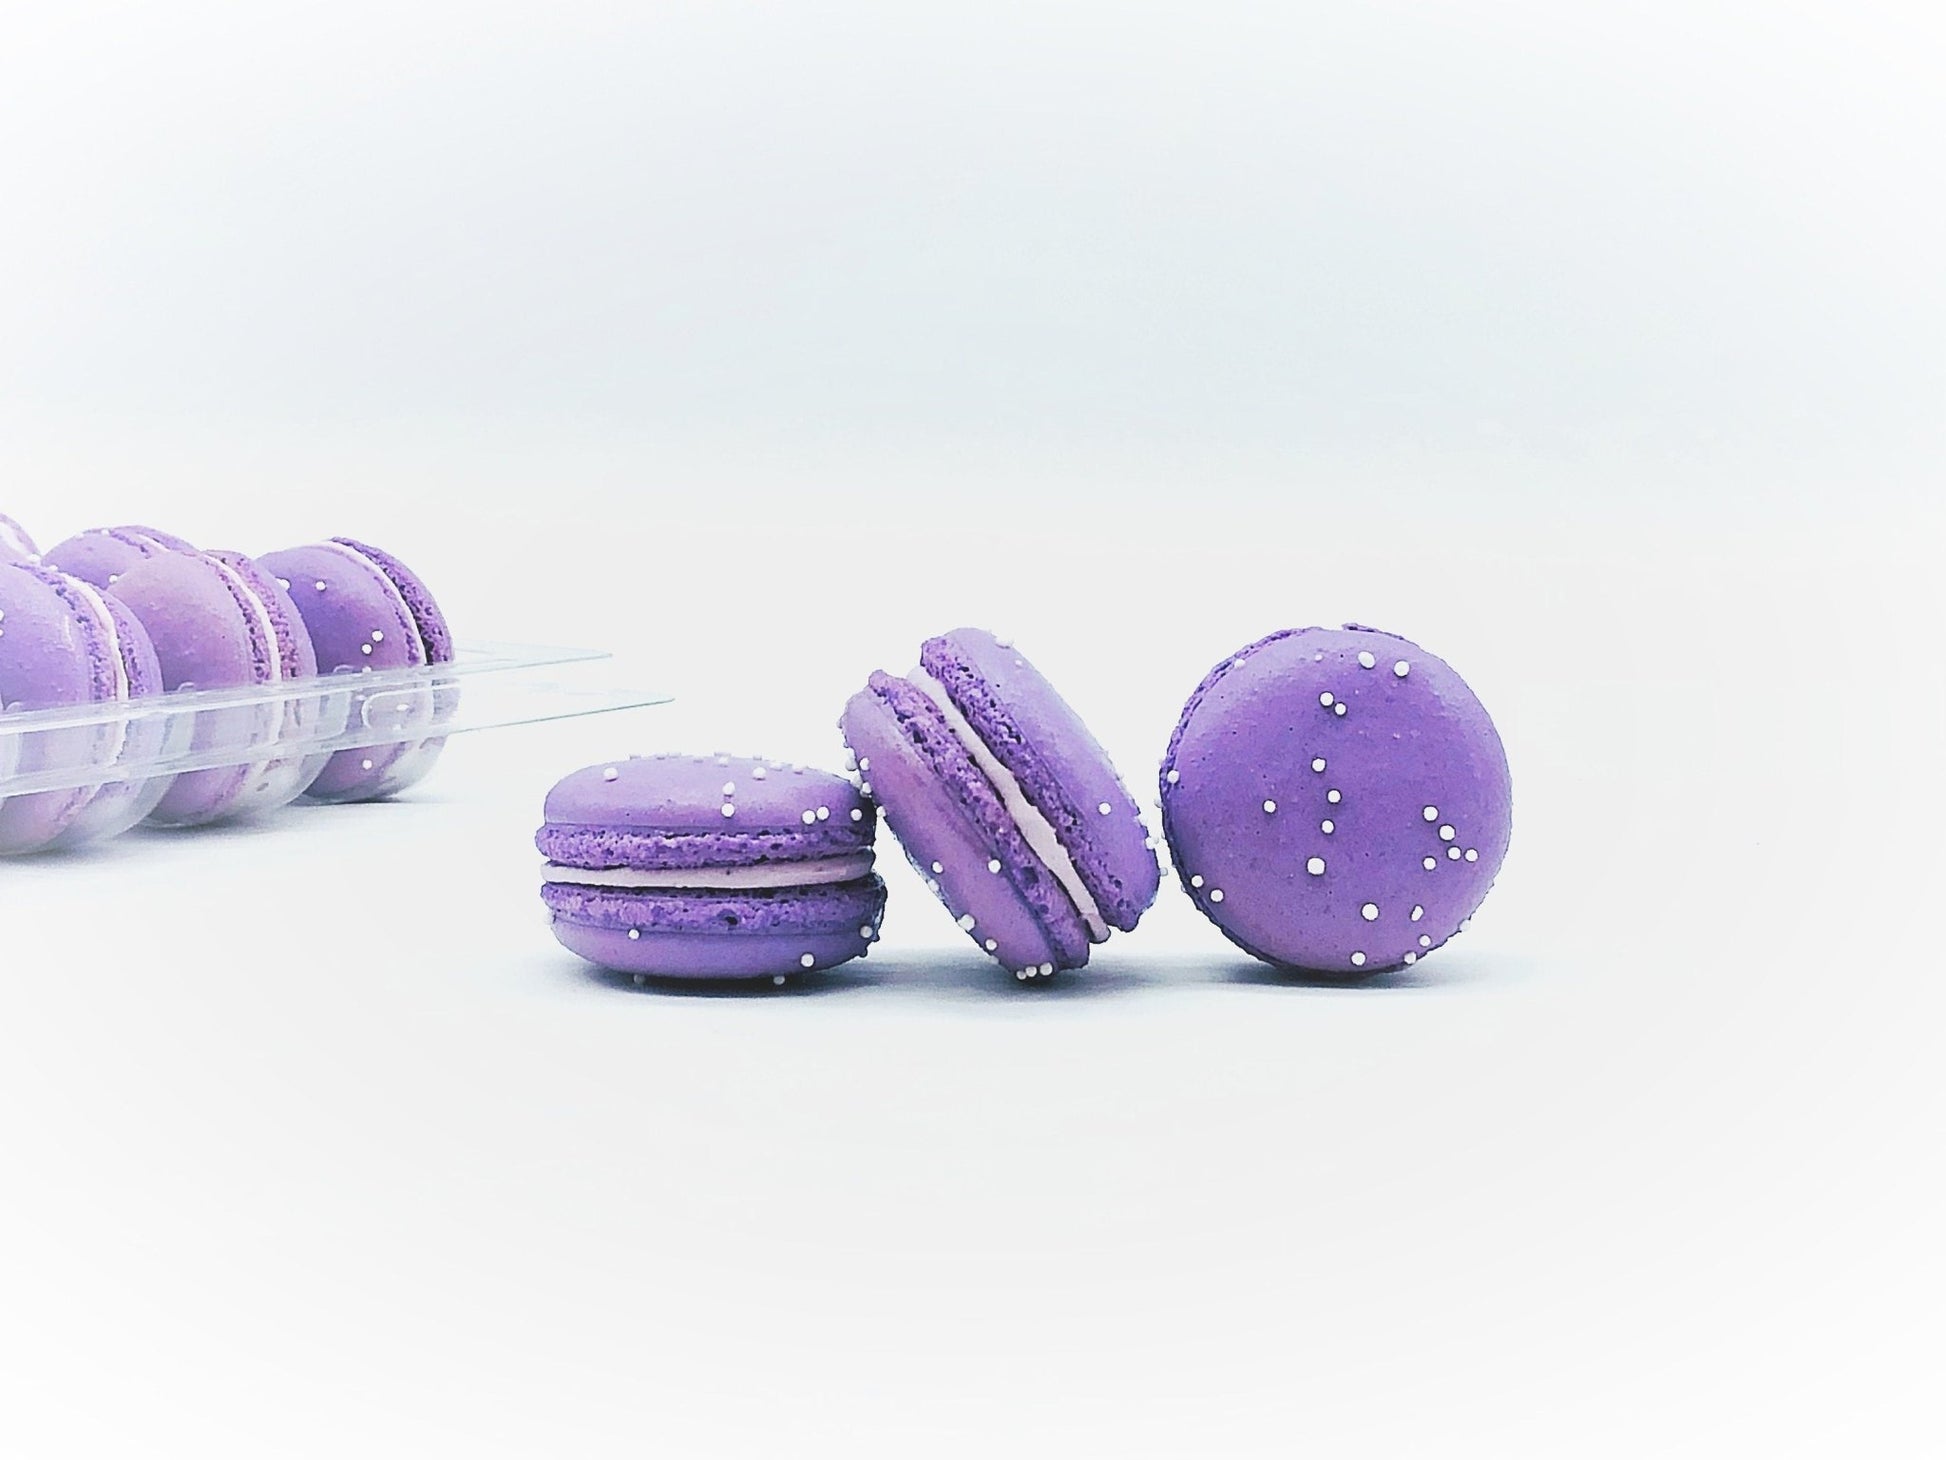 50 Pack Taro French Macaron Value Pack - Macaron Centrale